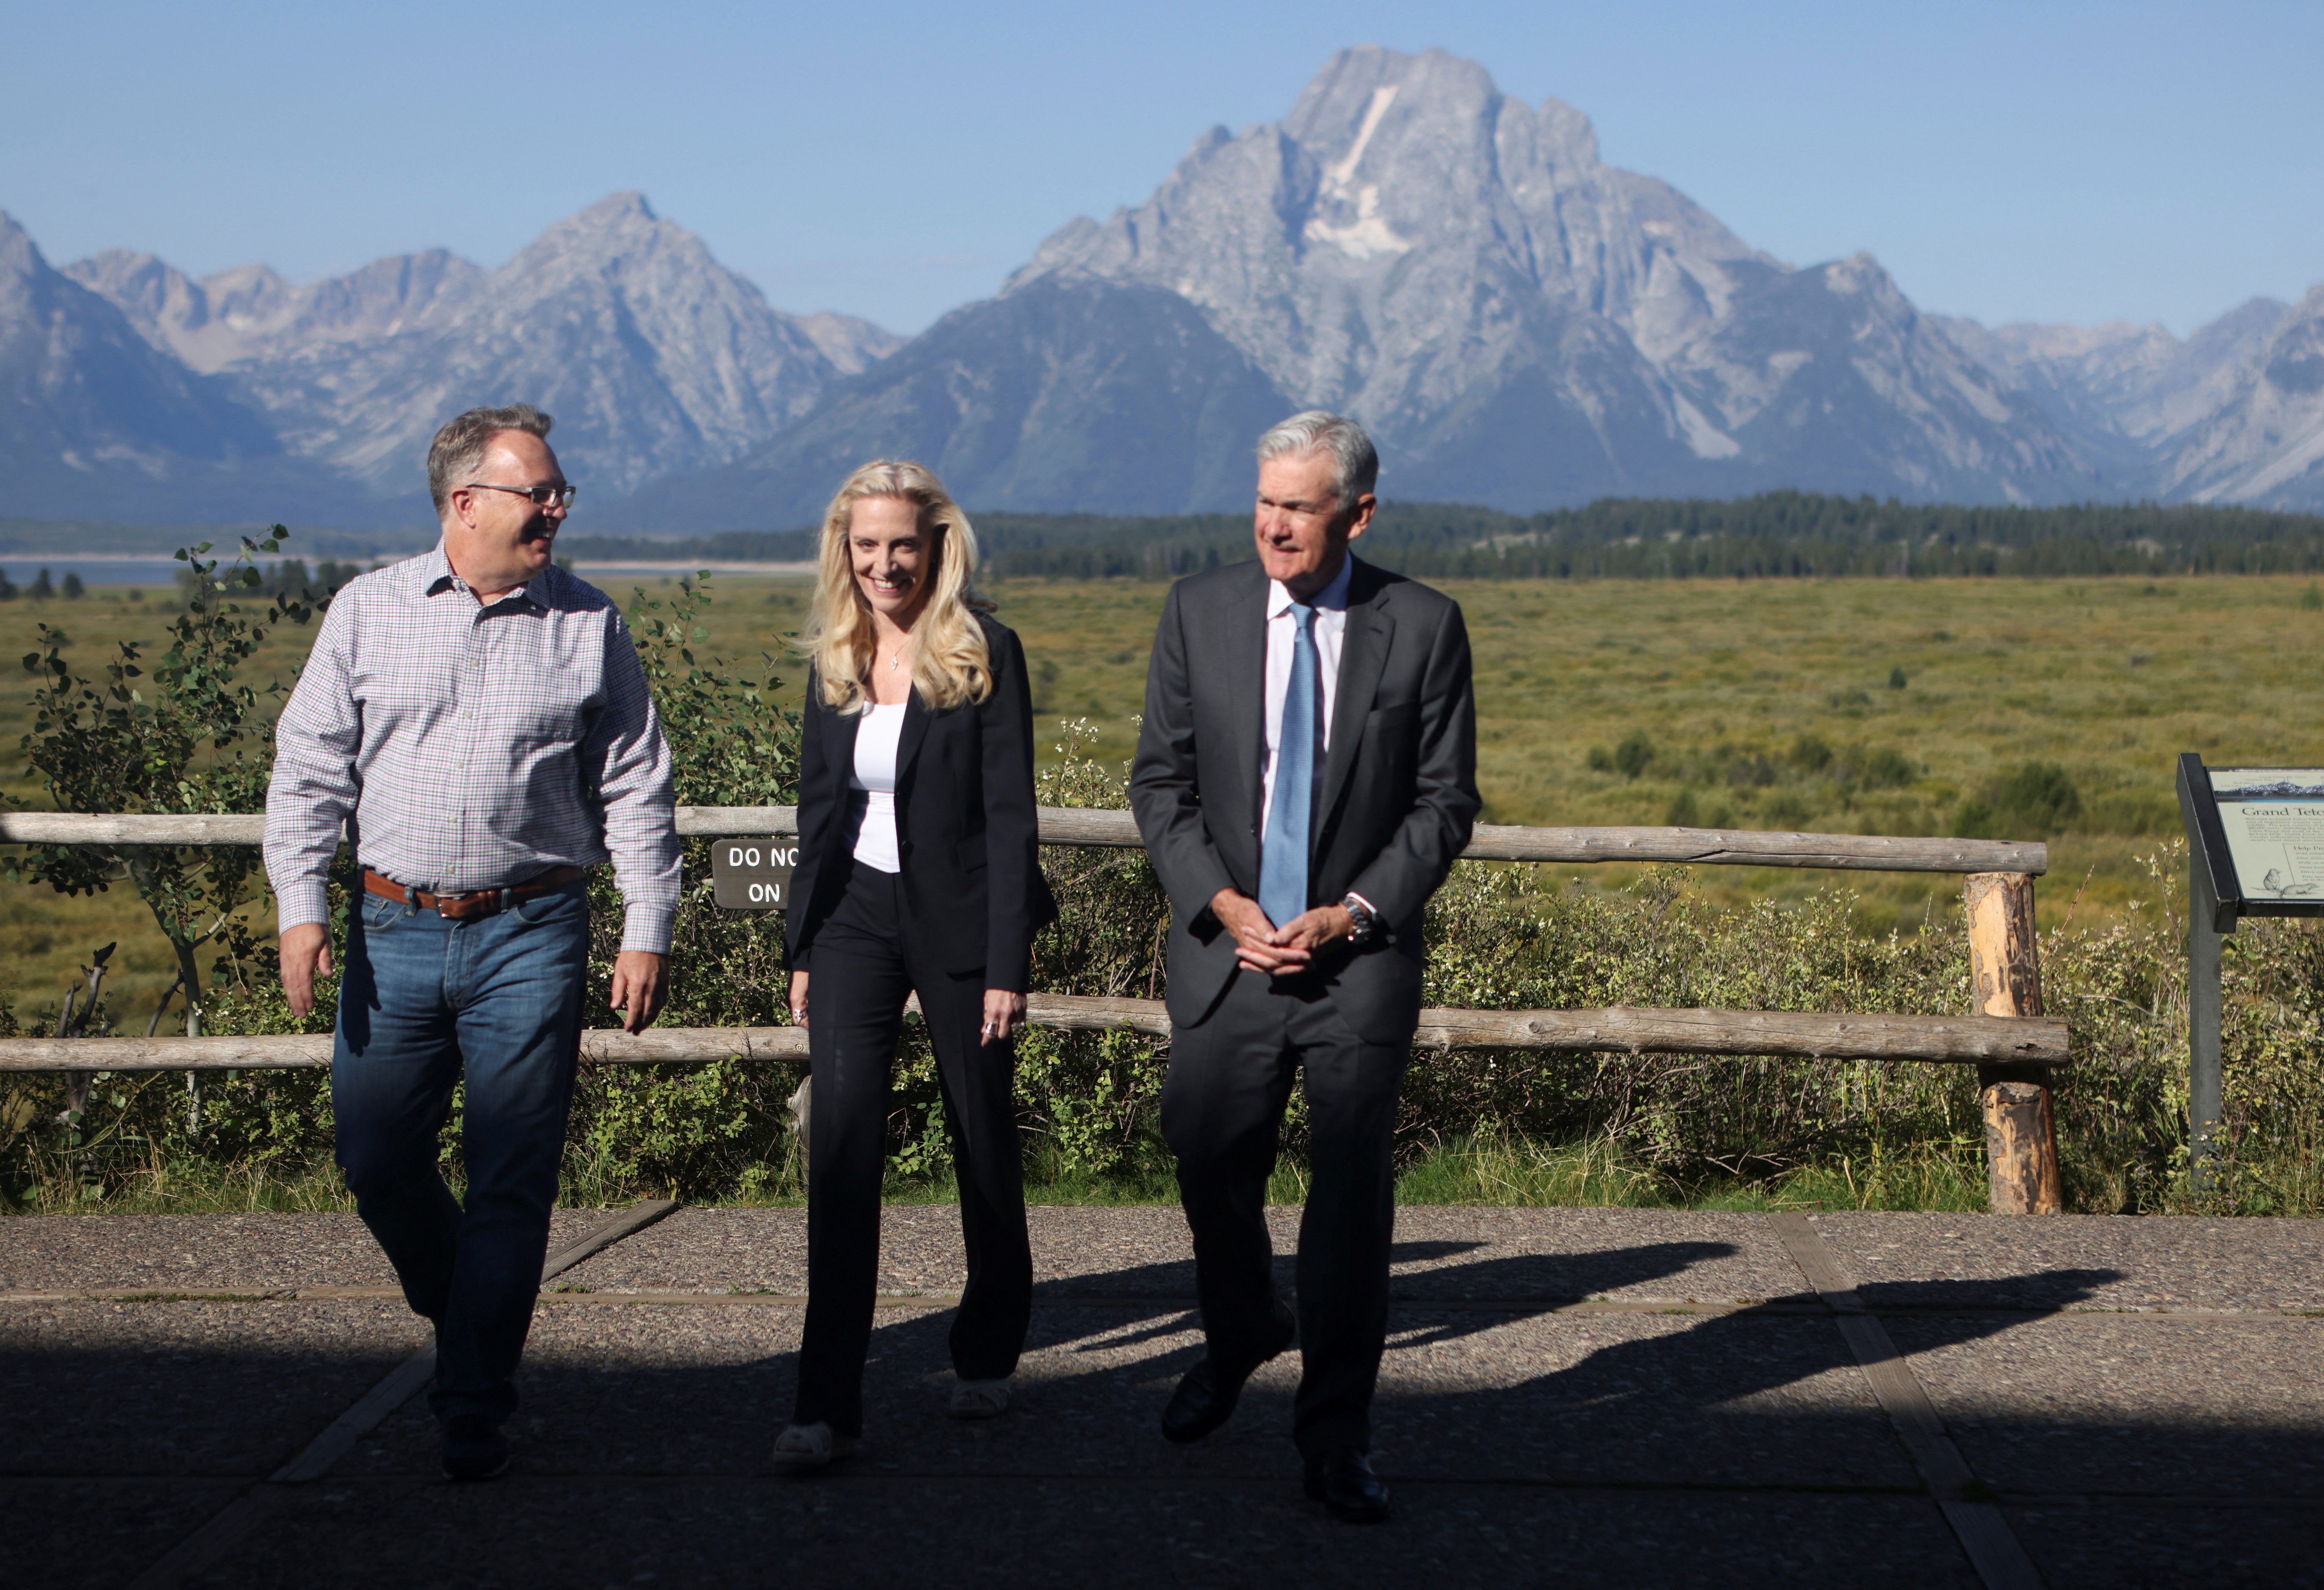 Financial leaders from around the world gathered for the Jackson Hole Economic Symposium